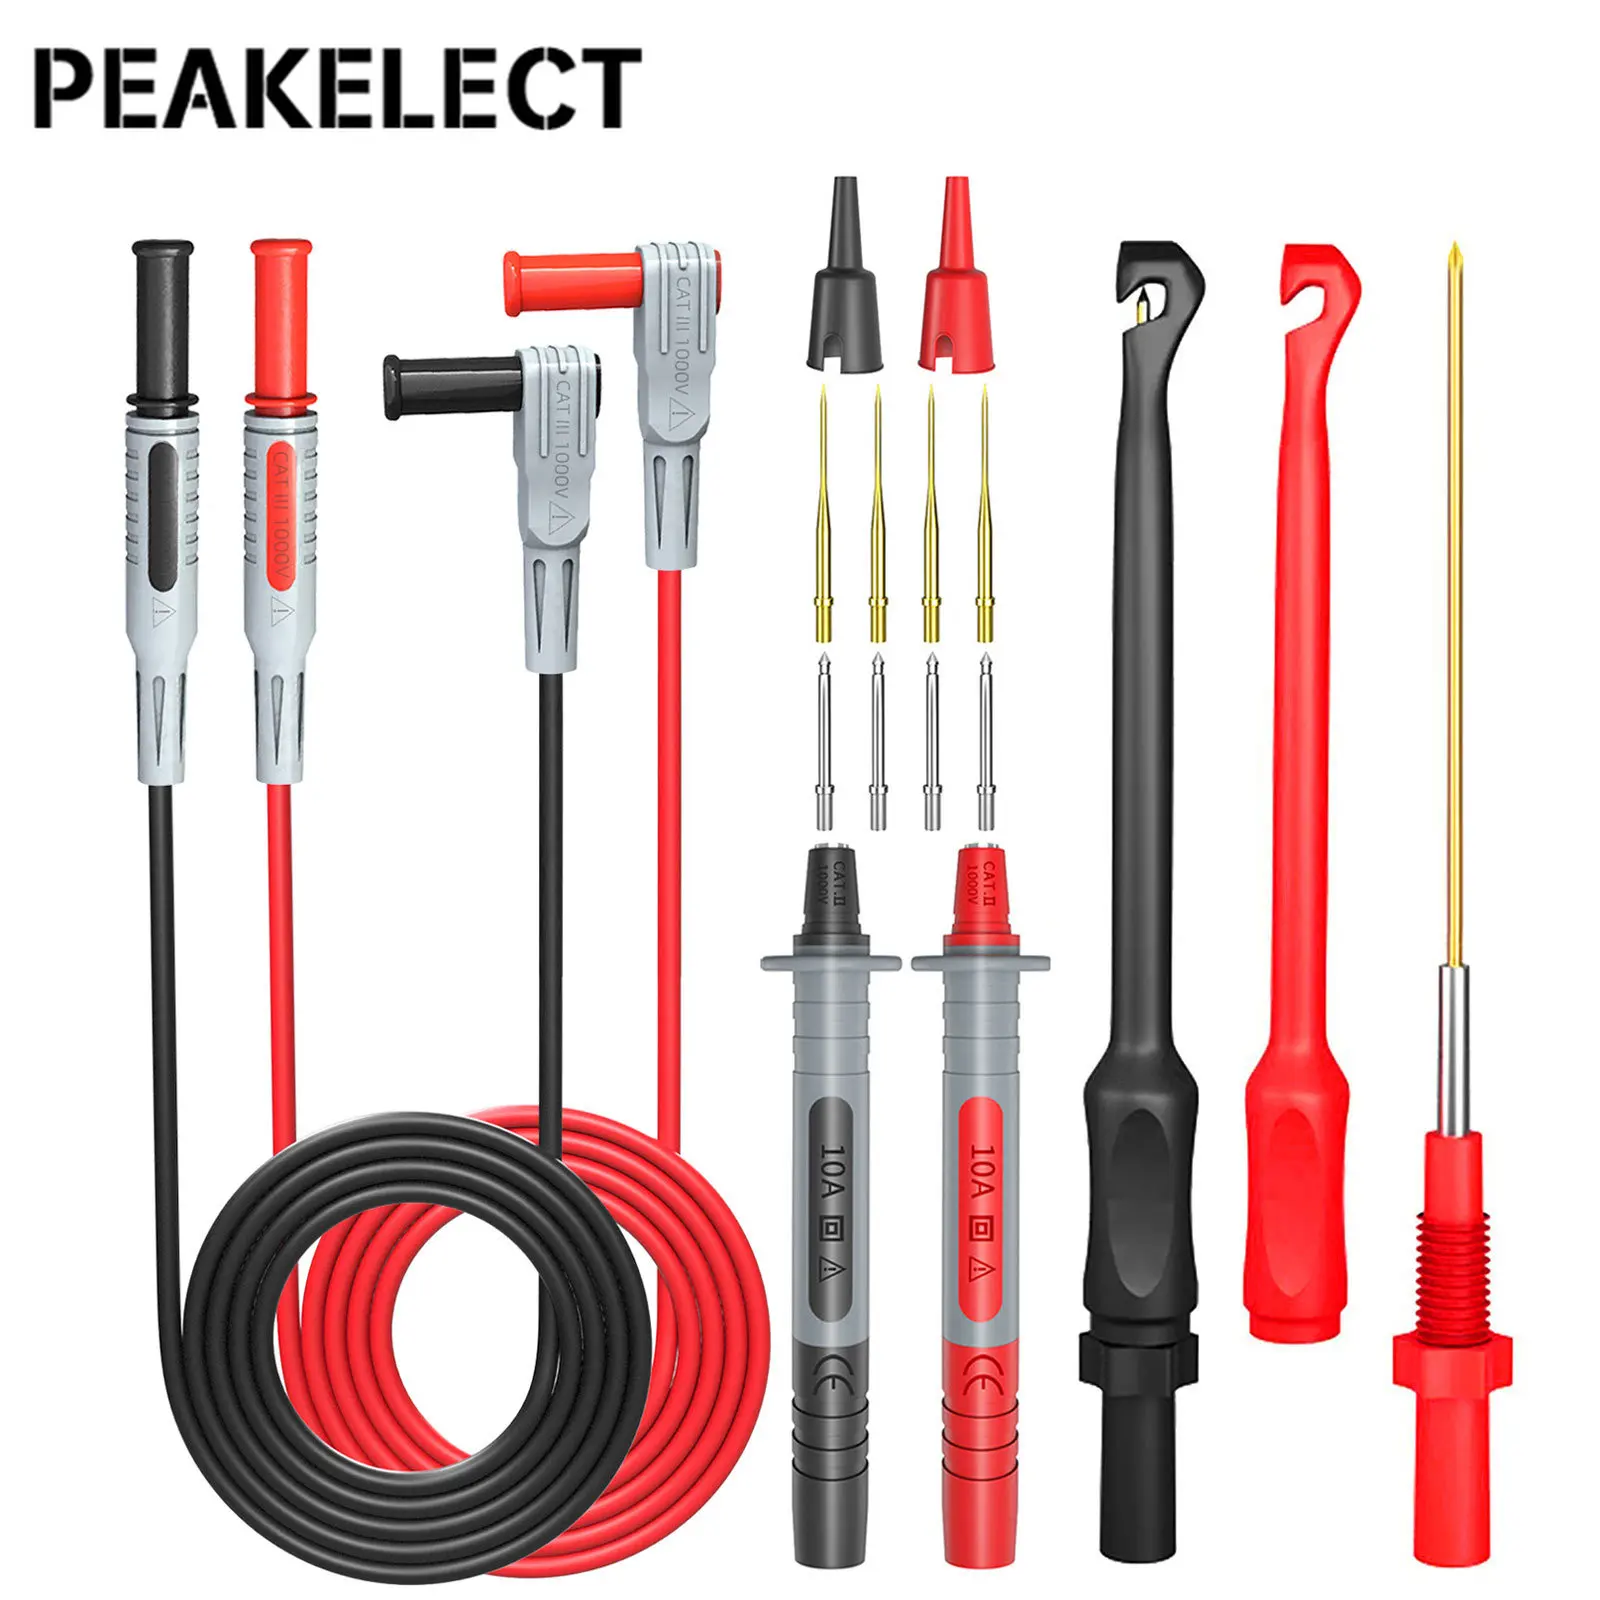 цена Peakelect P1033B Multimeter Test Probes Leads Kit with Wire Piercing Puncture 4mm Banana Plug Test Leads Test Probes